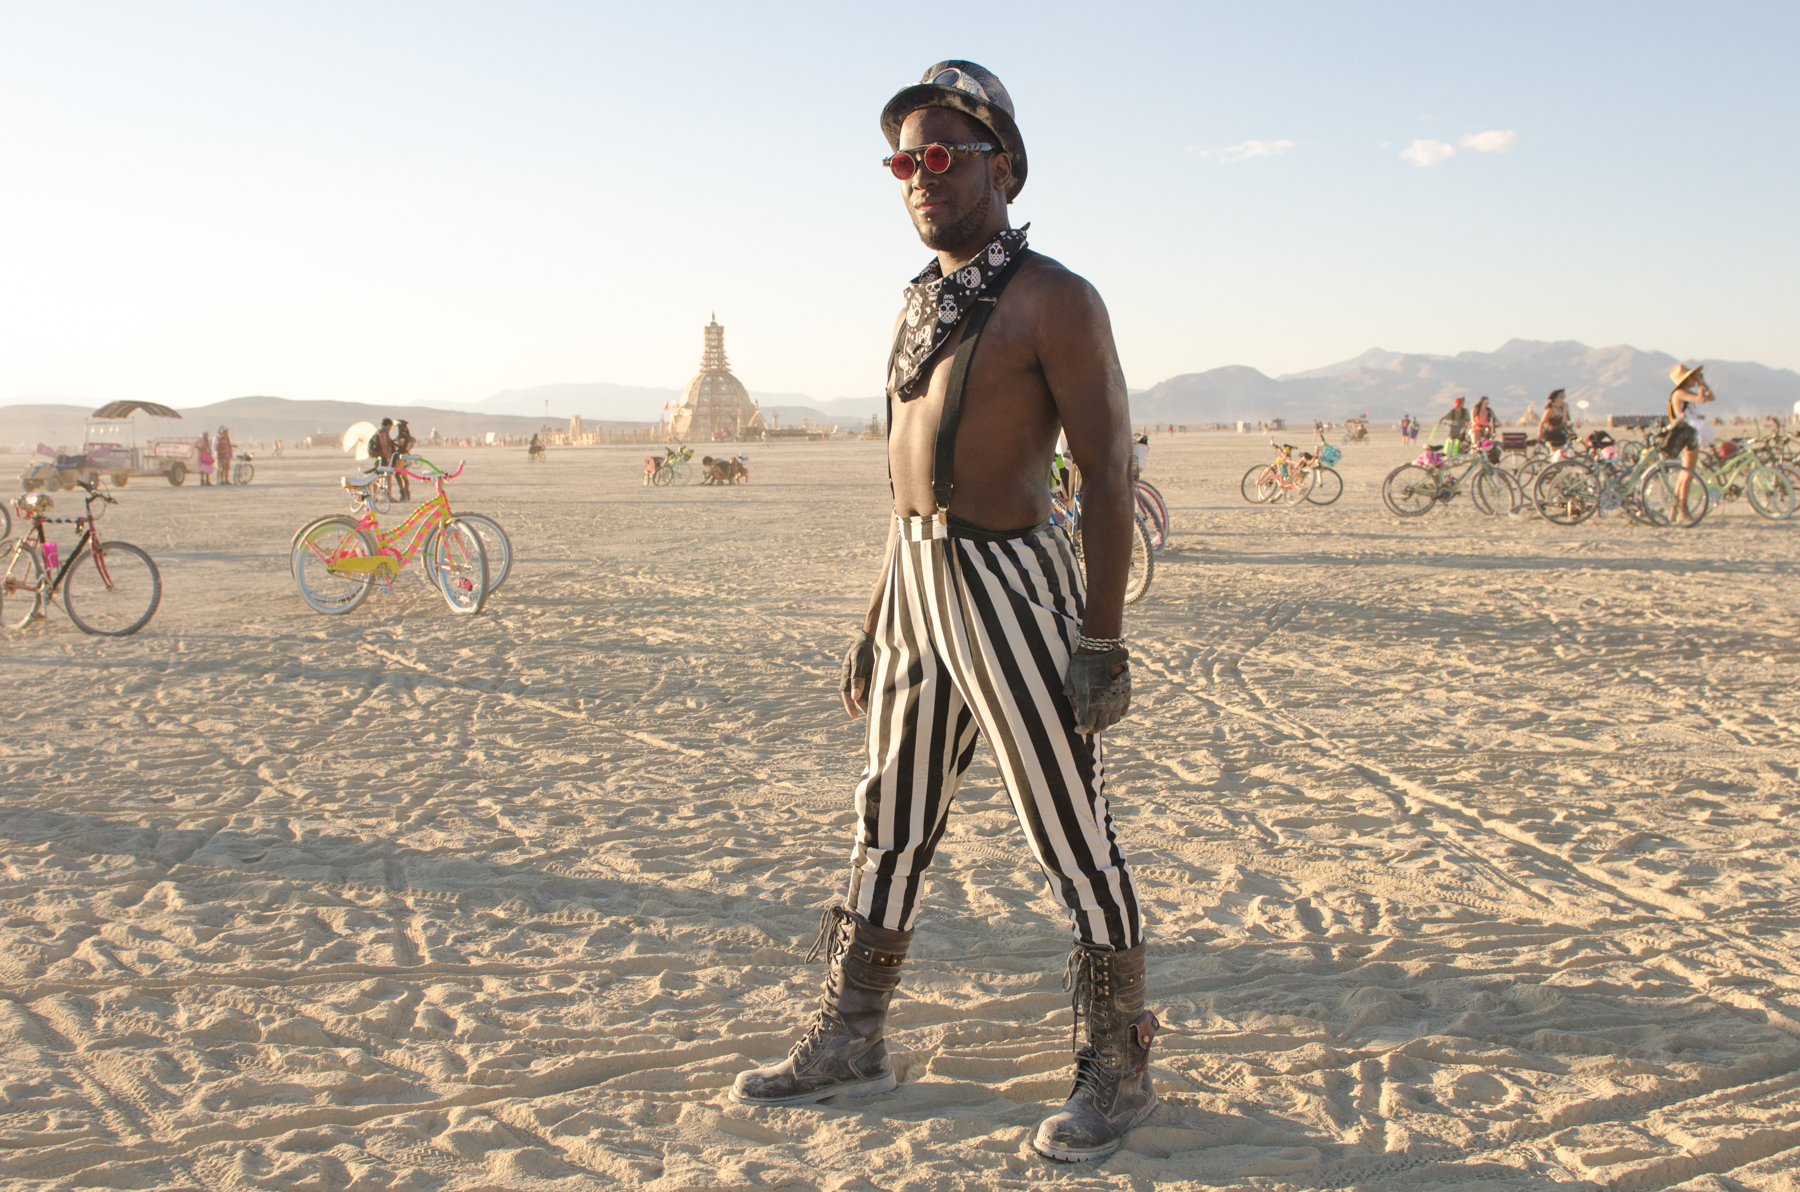 If I'd had more time I would have loved to do a "Humans of Burning Man" series and interviewed every interesting-looking person I came across (which was thousands of people).